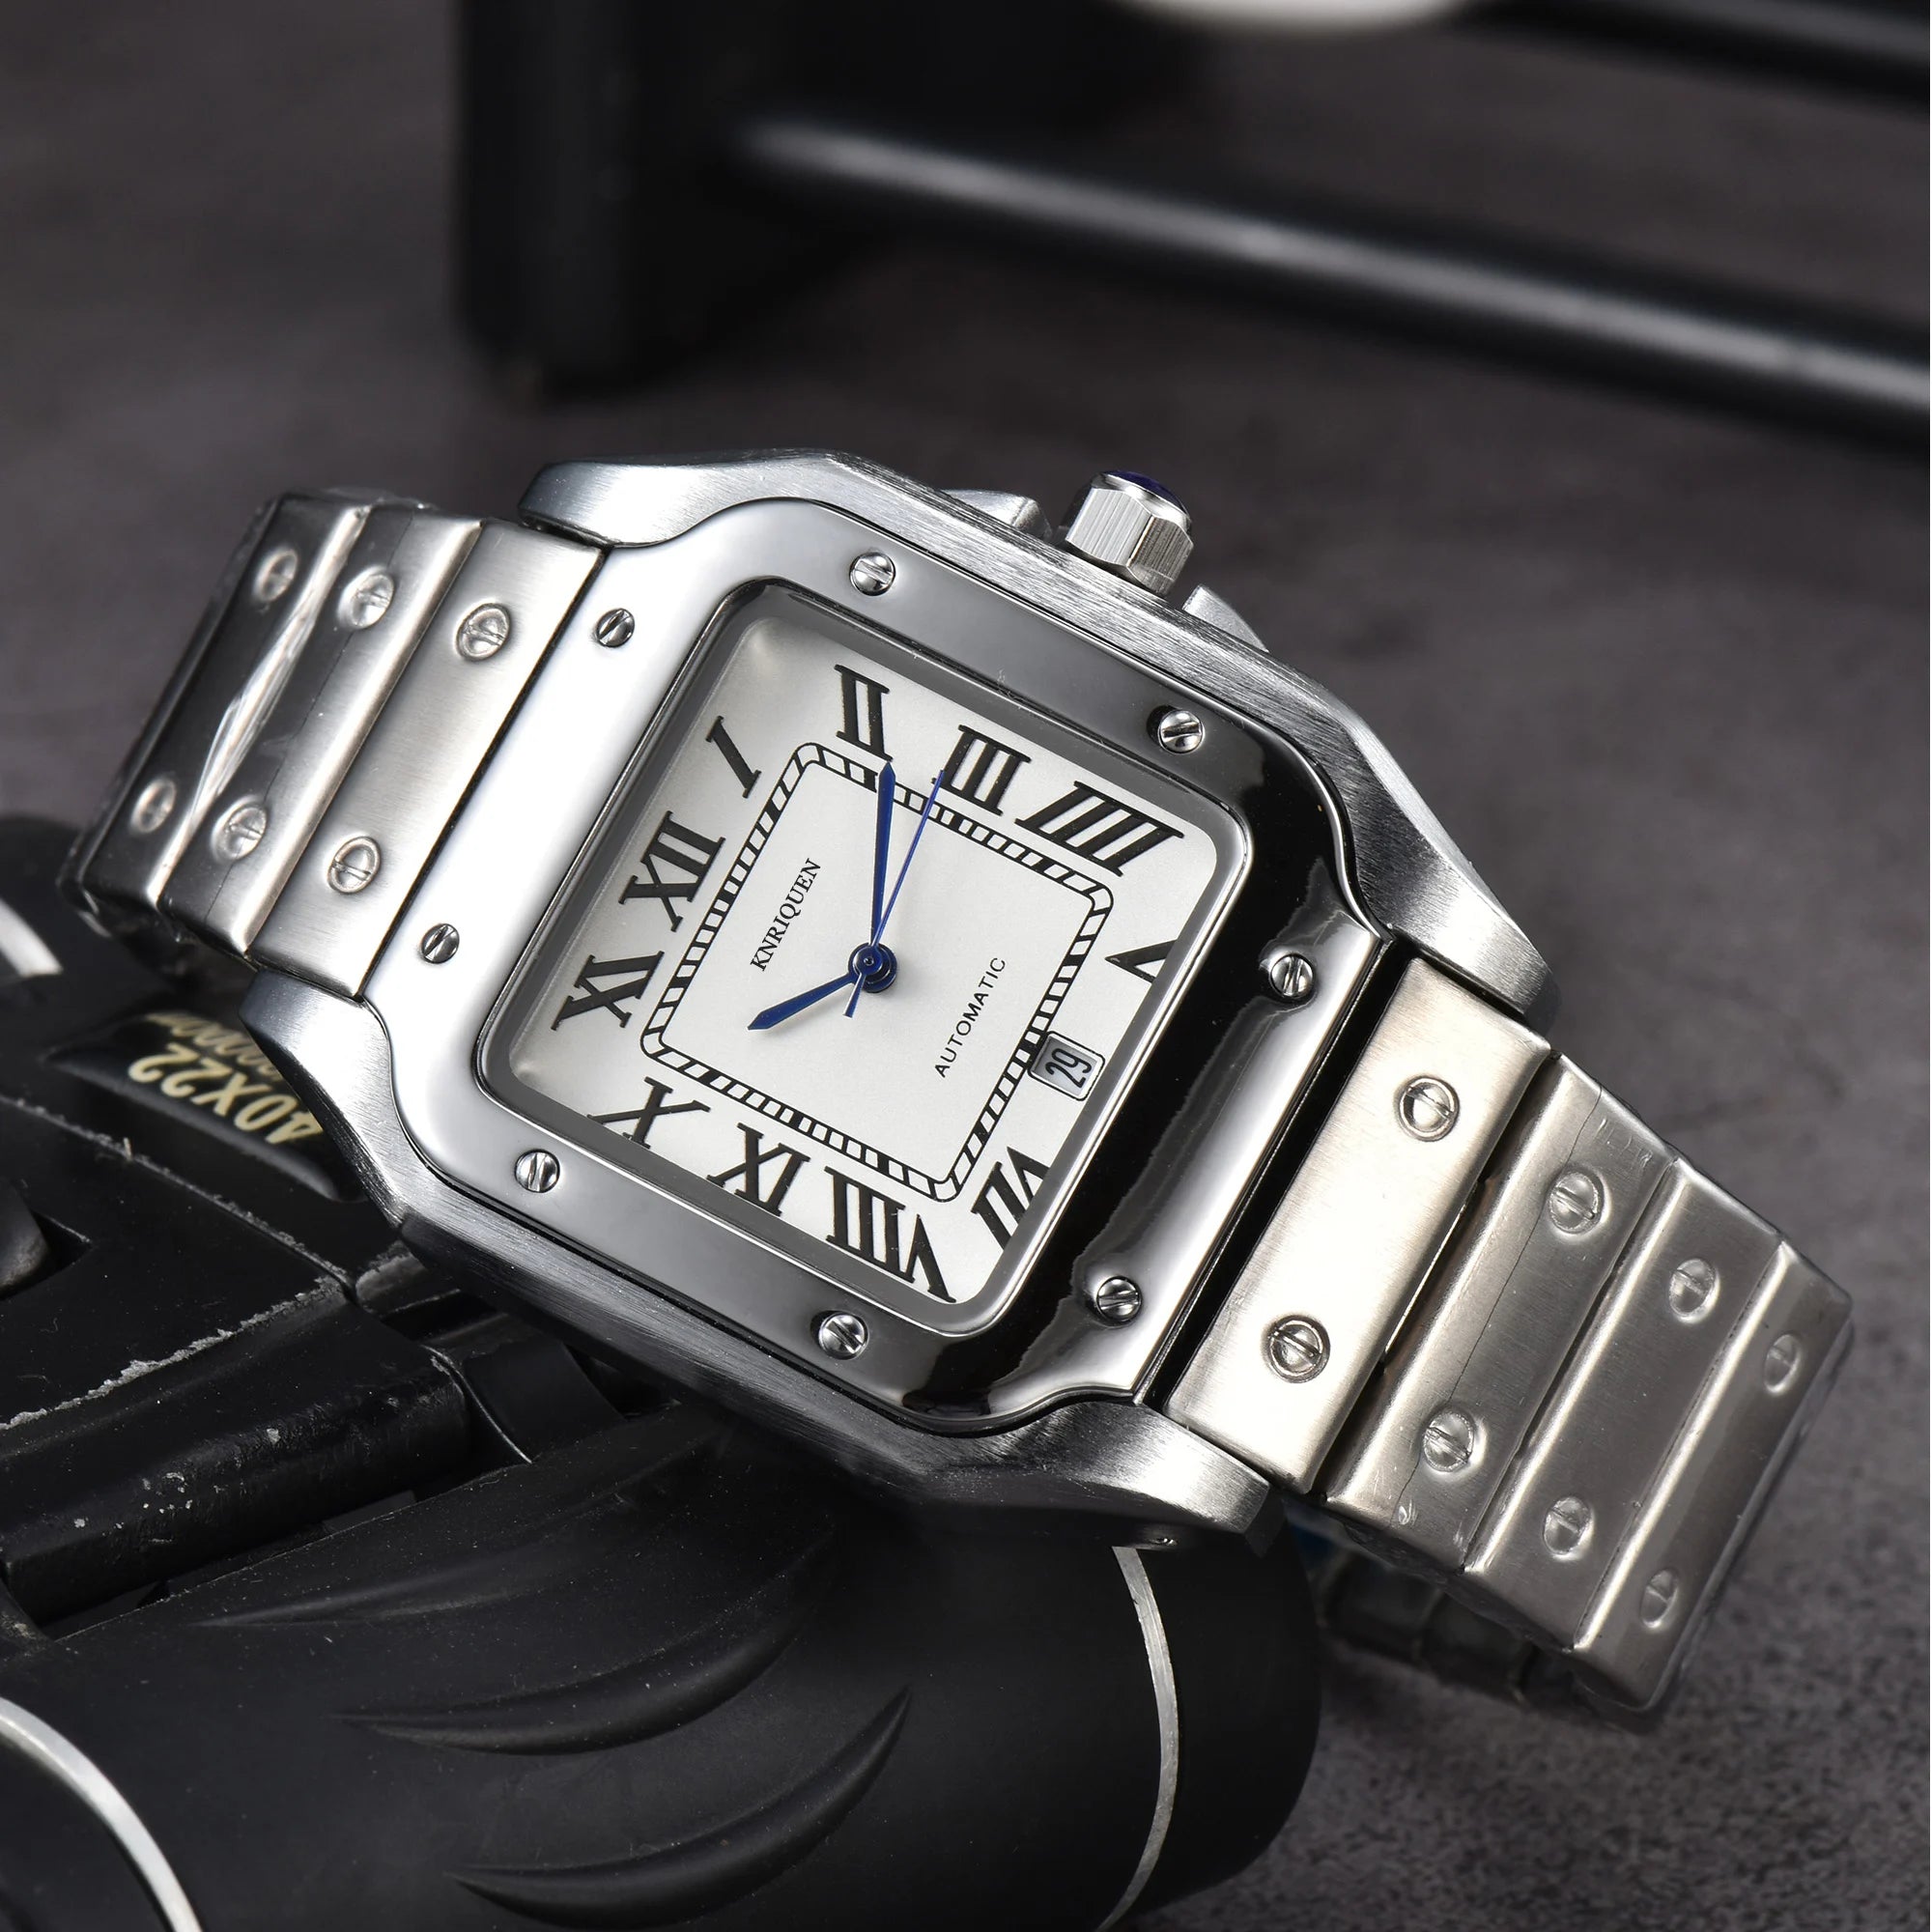 Luxury Men's Square Dial Steel Strap Watch with Automatic Date Movement  OurLum.com 3  